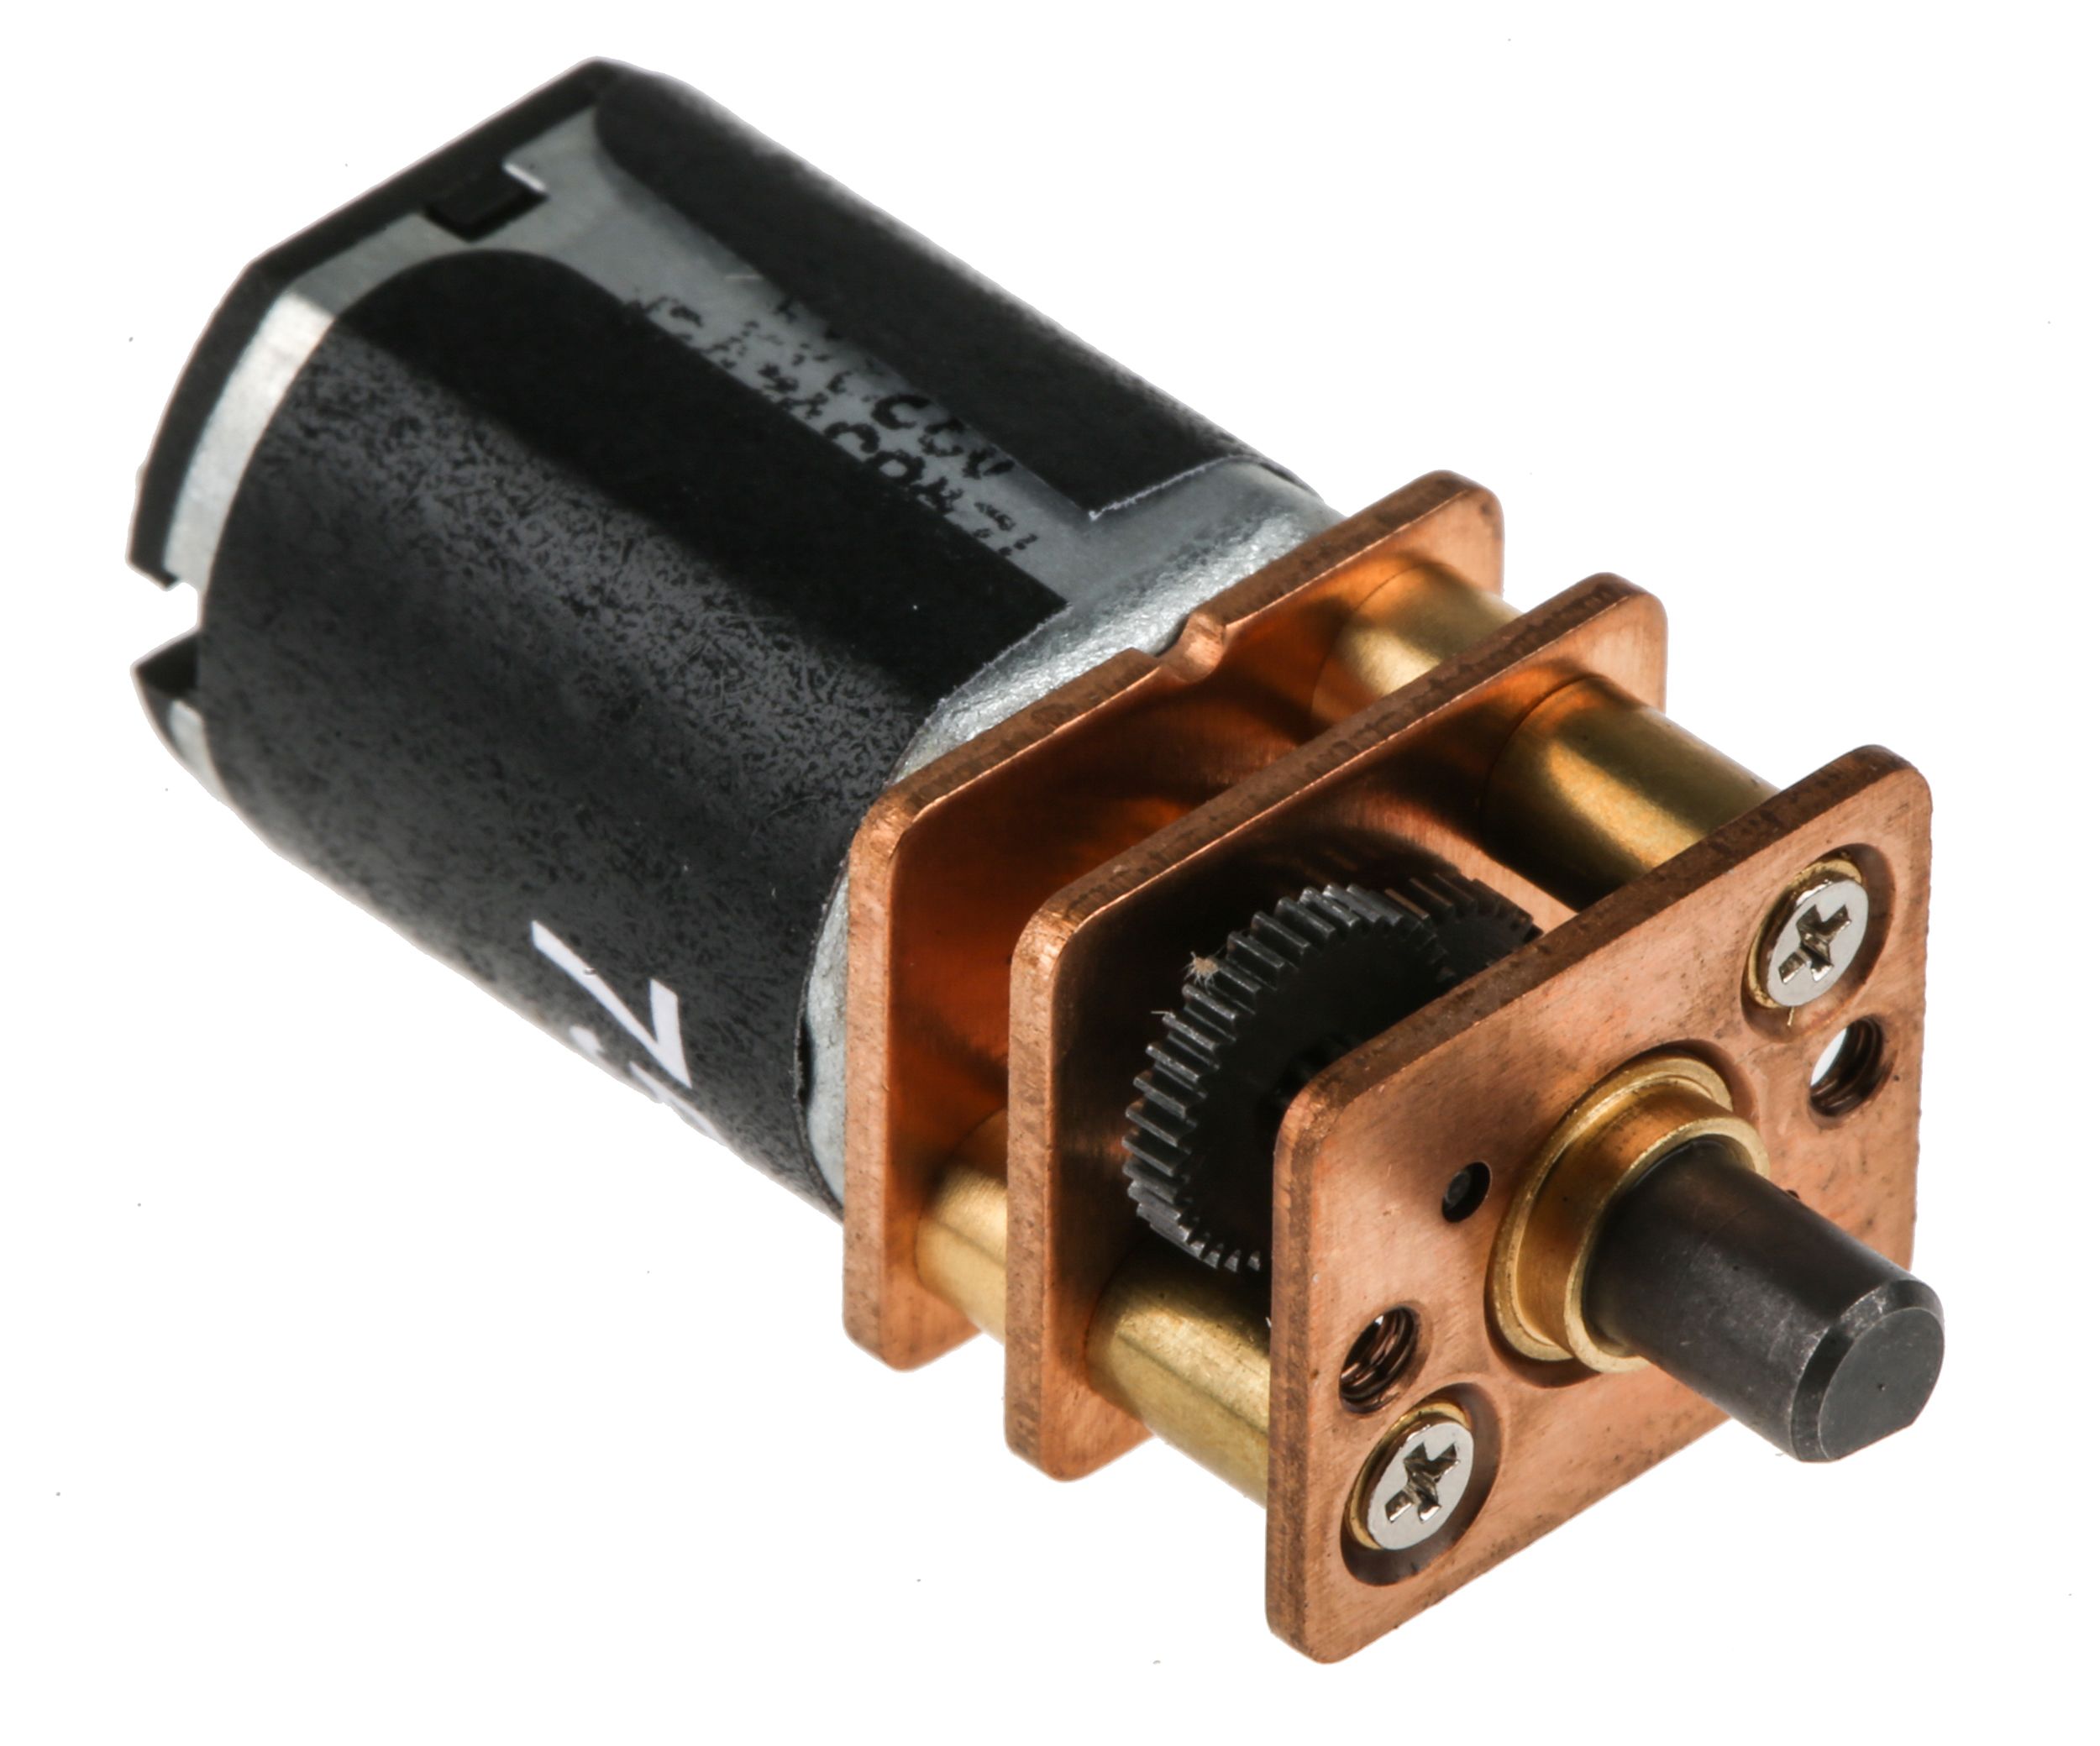 RS PRO Brushed Geared DC Geared Motor, 0.46 W, 6 V, 17 mNm, 230 rpm, 3mm Shaft Diameter